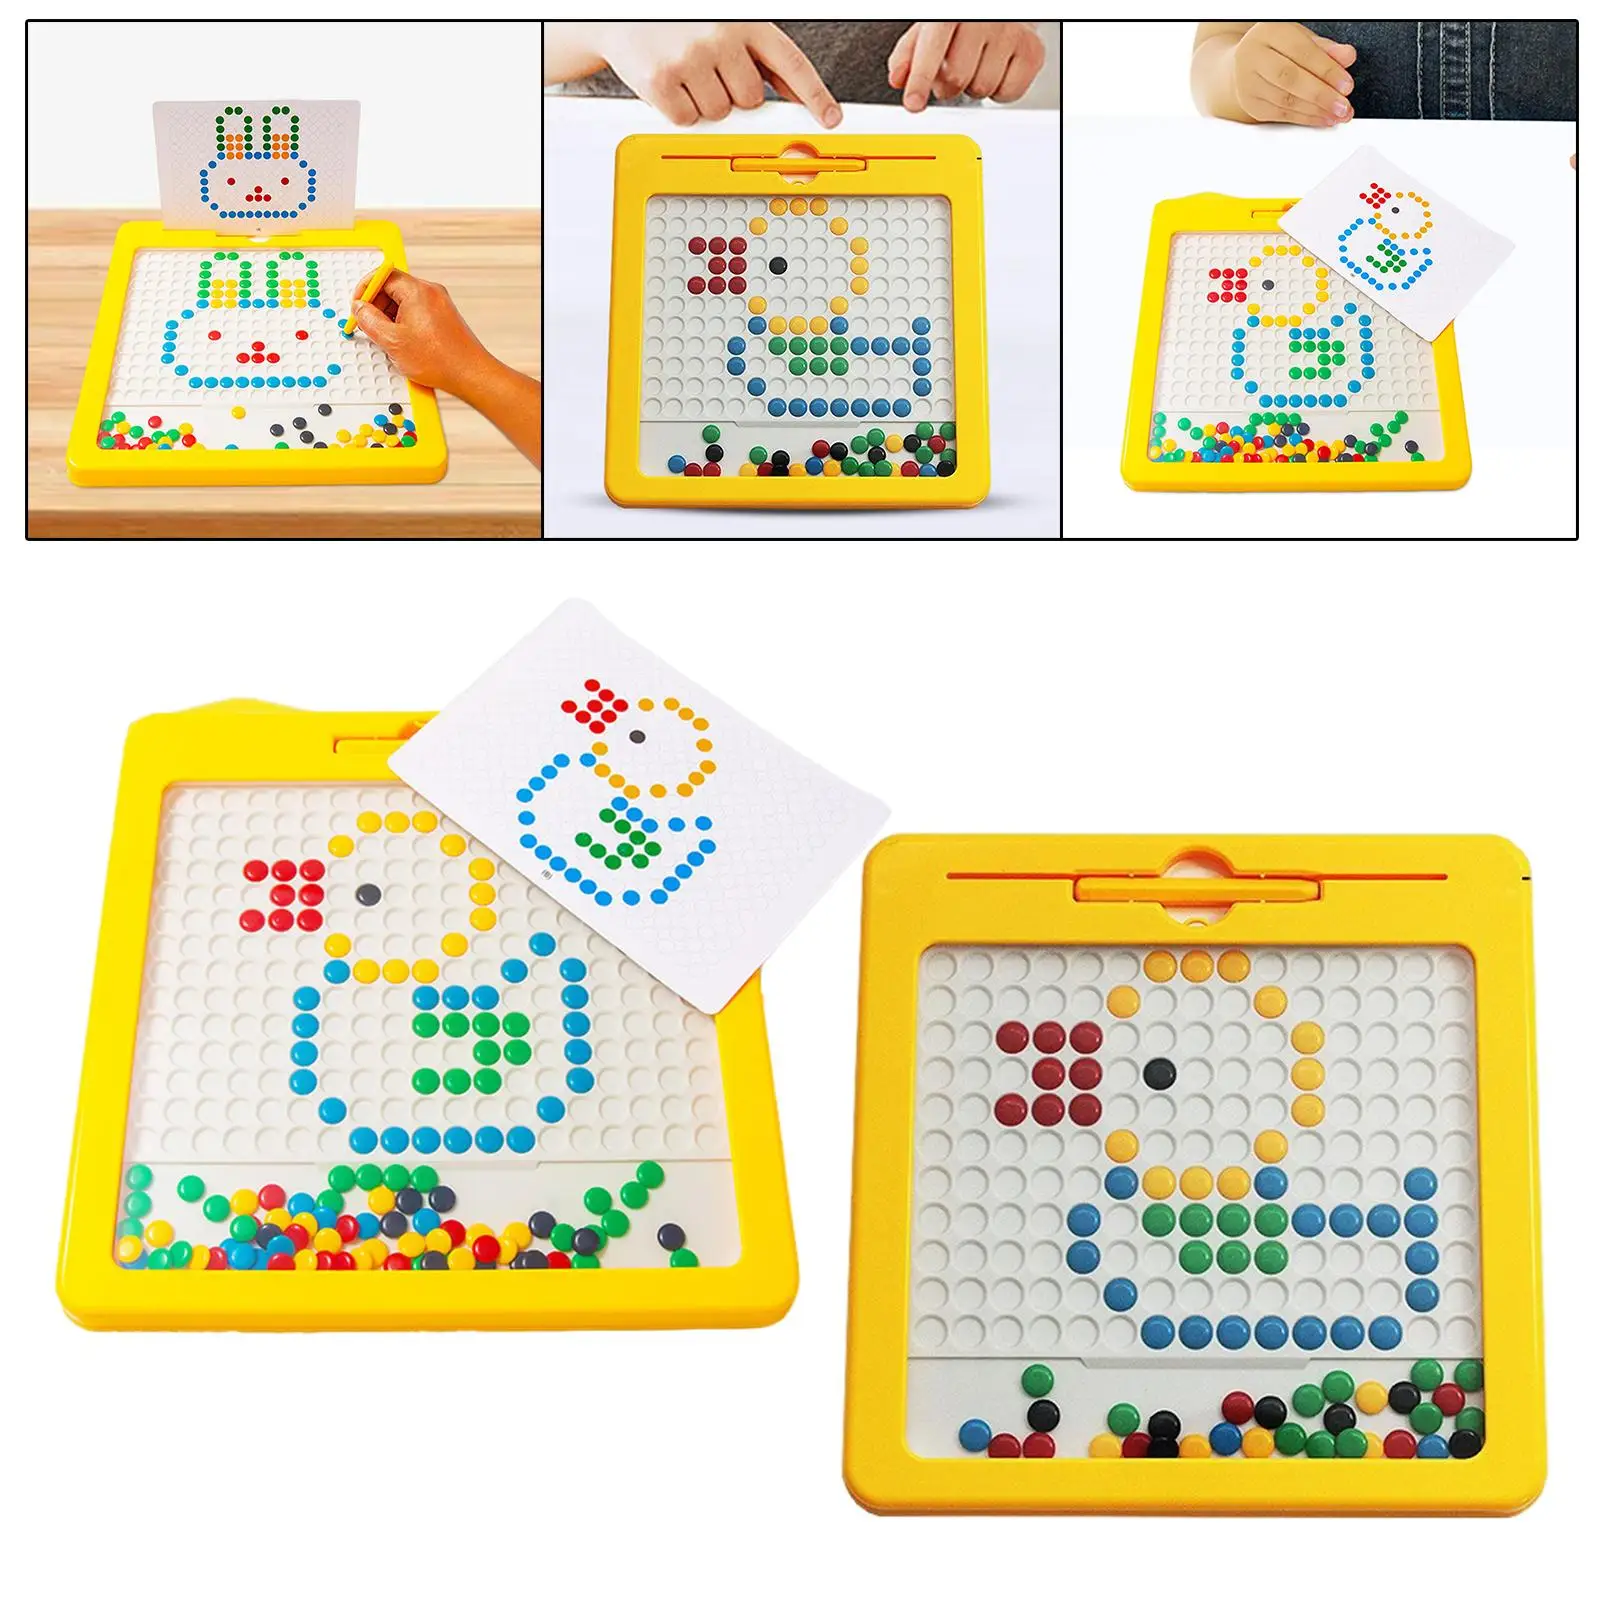 Magnetic Drawing Board with Magnetic Pen, Beads, Cards Educational Montessori Sensory Toys Drawing Pad for Toddlers Kids